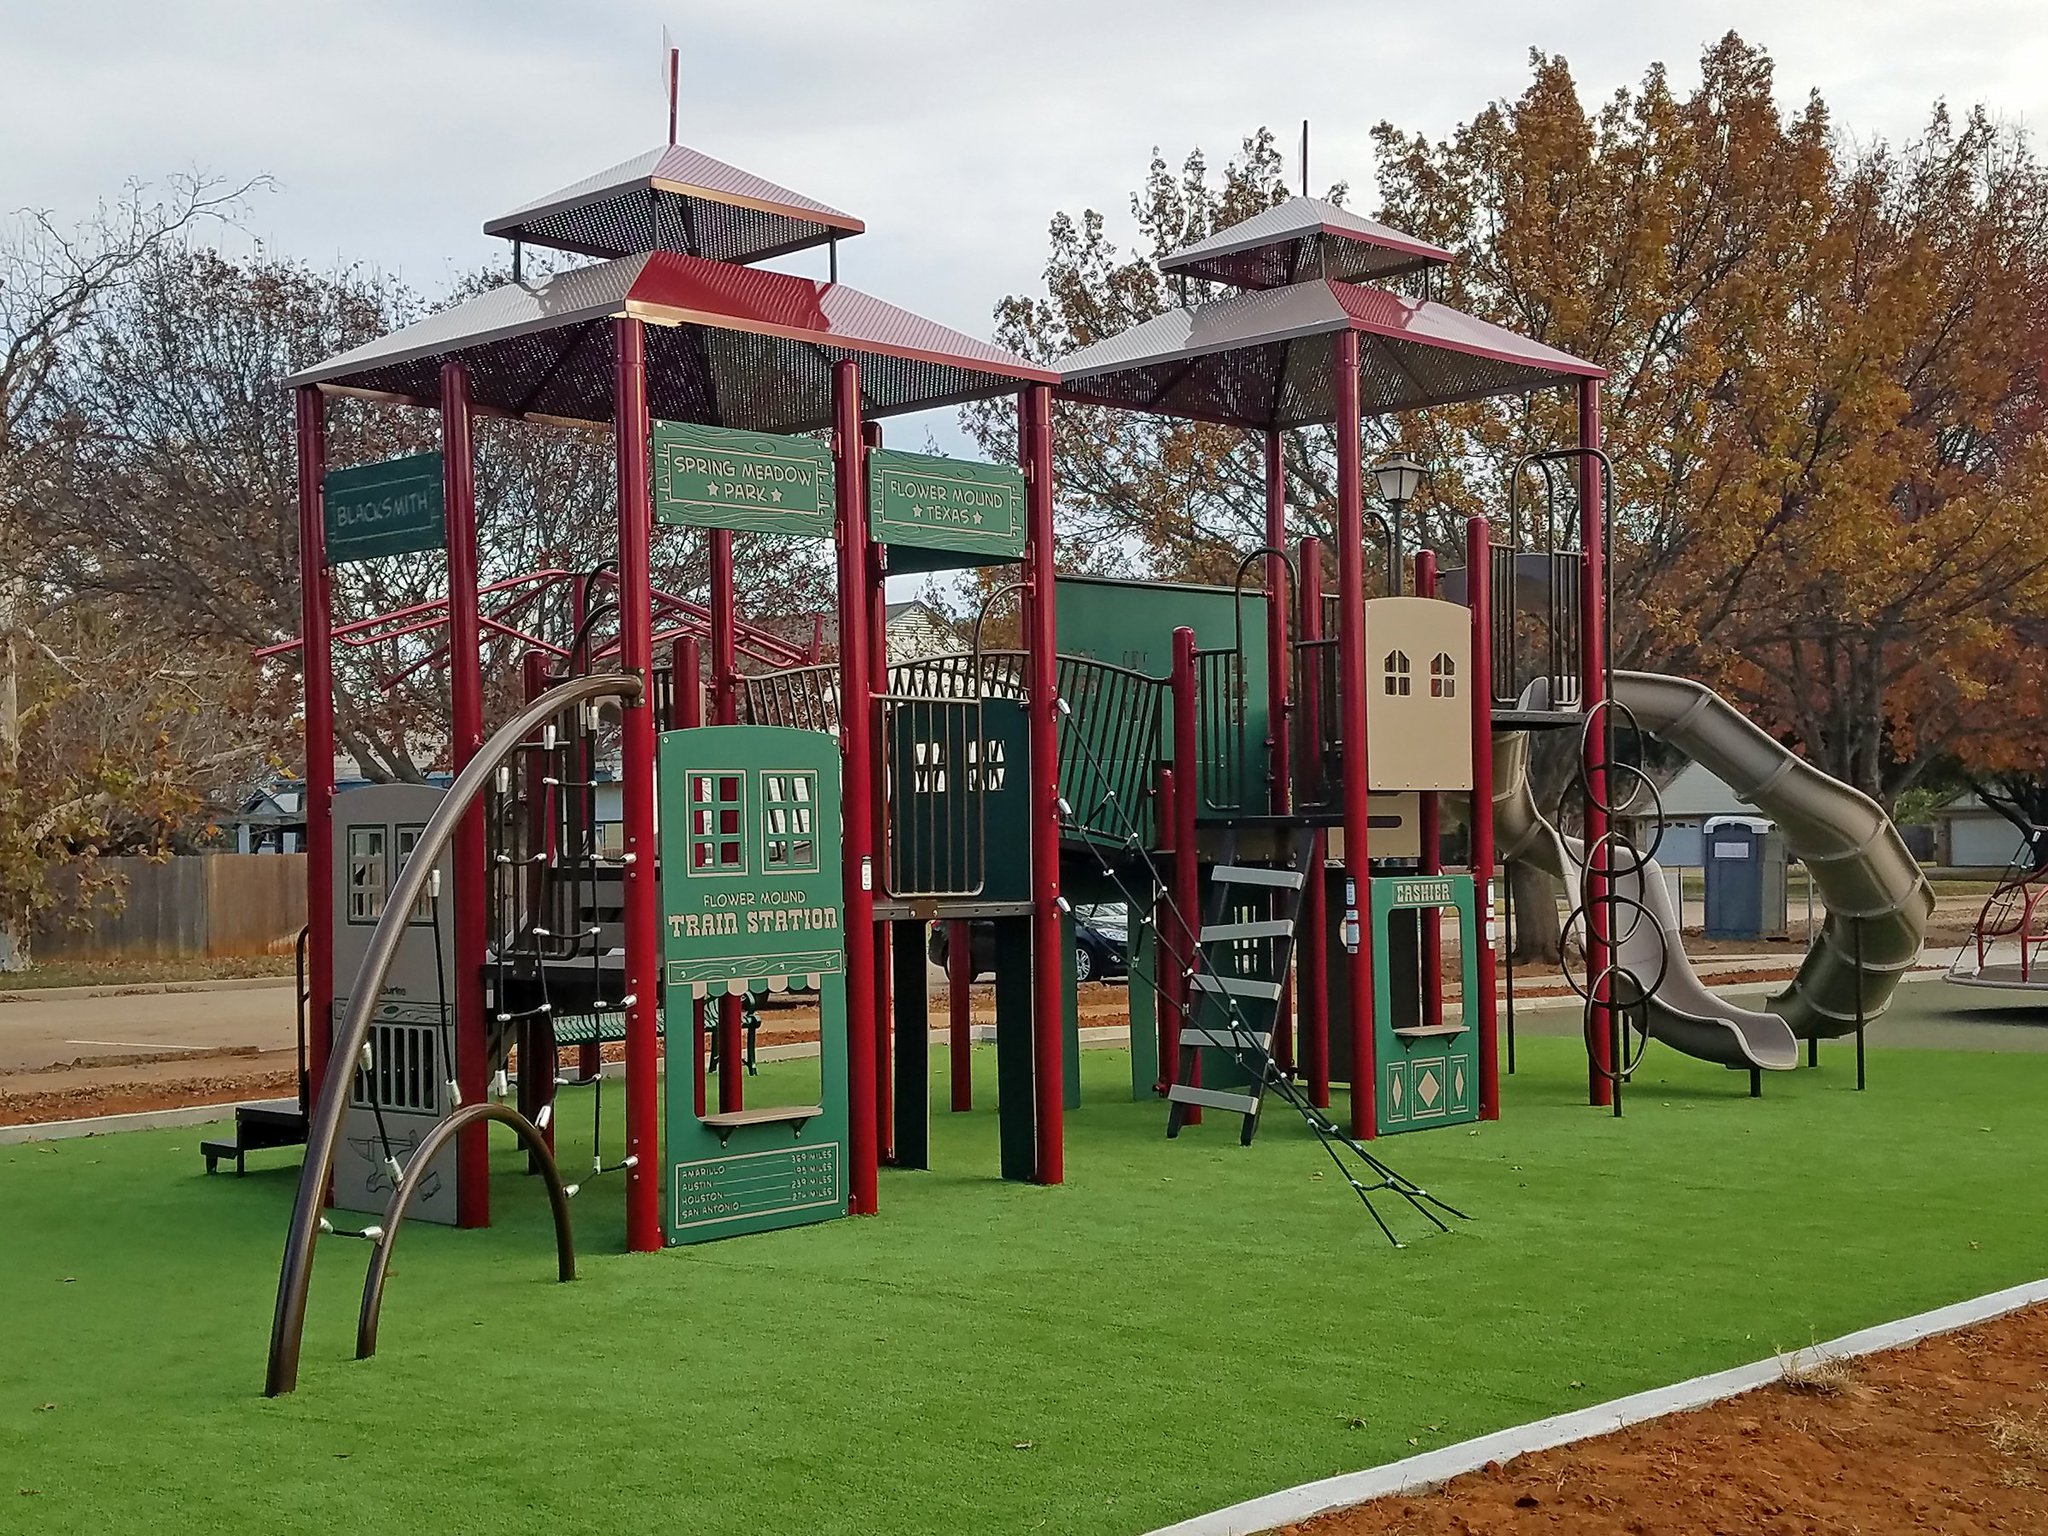 Town Of Flower Mound On Twitter Perks Of Unseasonably Warm Weather More Time To Spend Outdoors At Flower Mound S Newest Improved Park Spring Meadow Park Located At 4001 Spring Meadow Lane